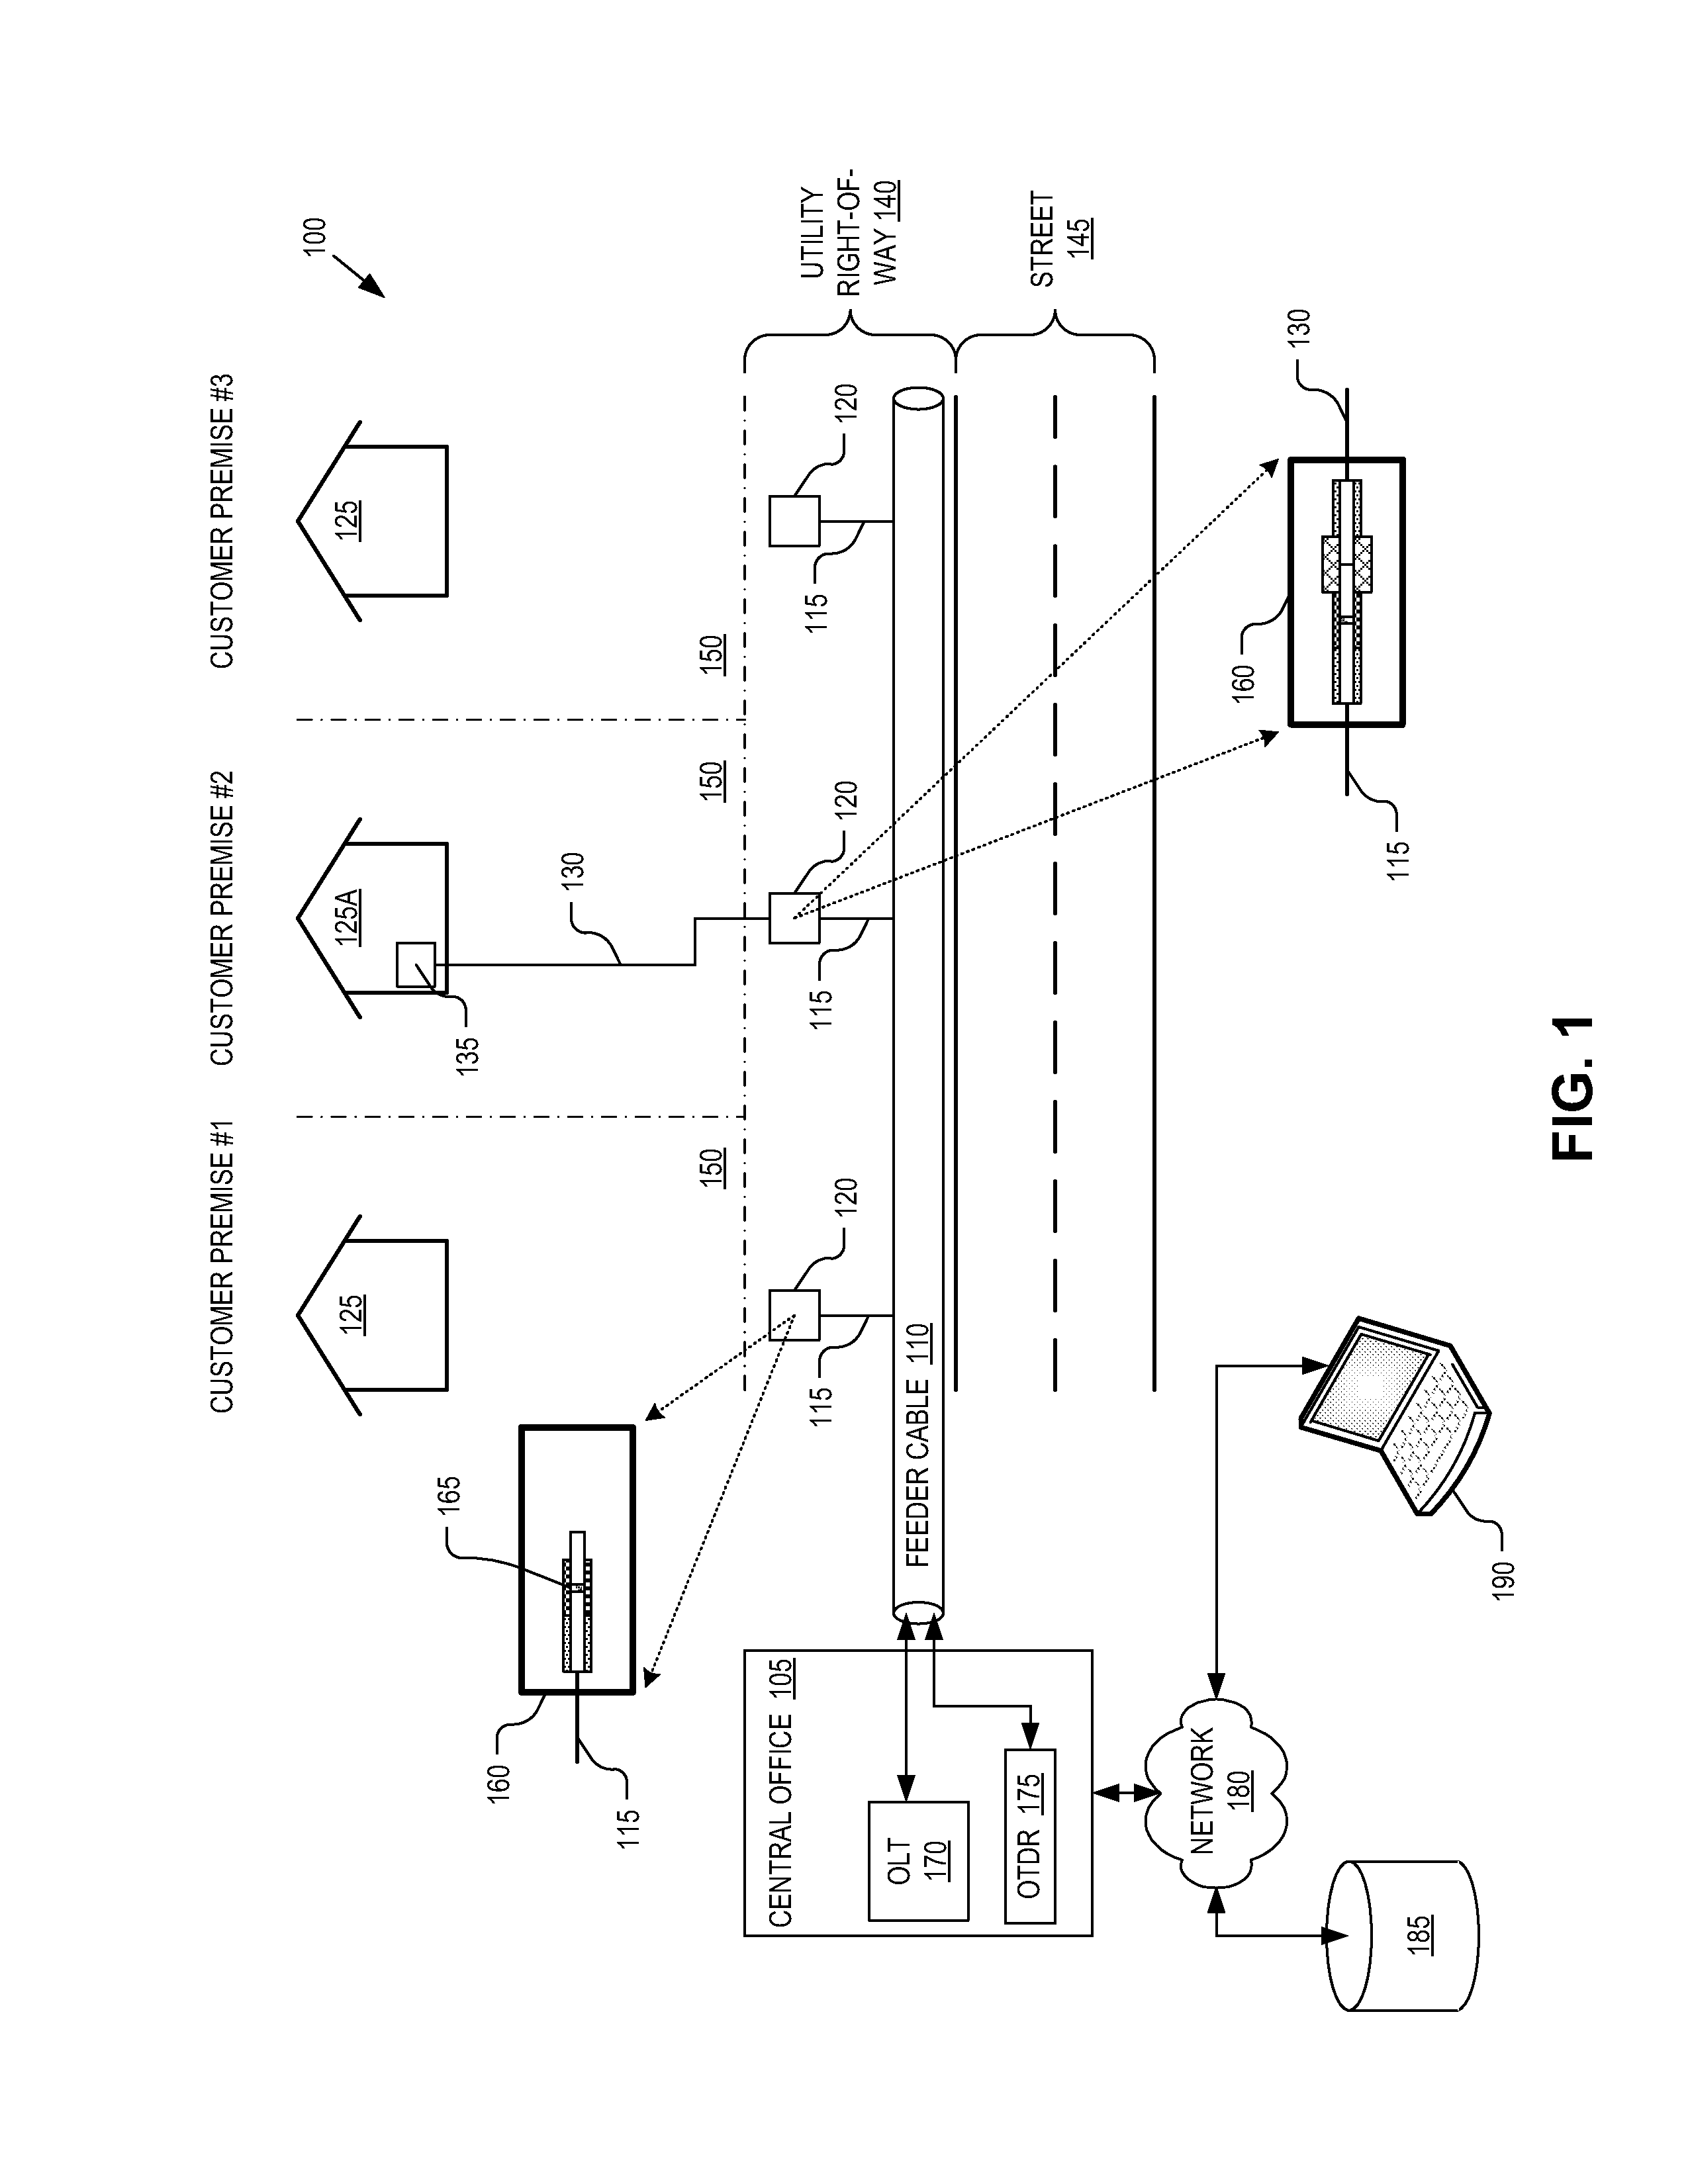 Installation of fiber-to-the-premise using optical demarcation devices